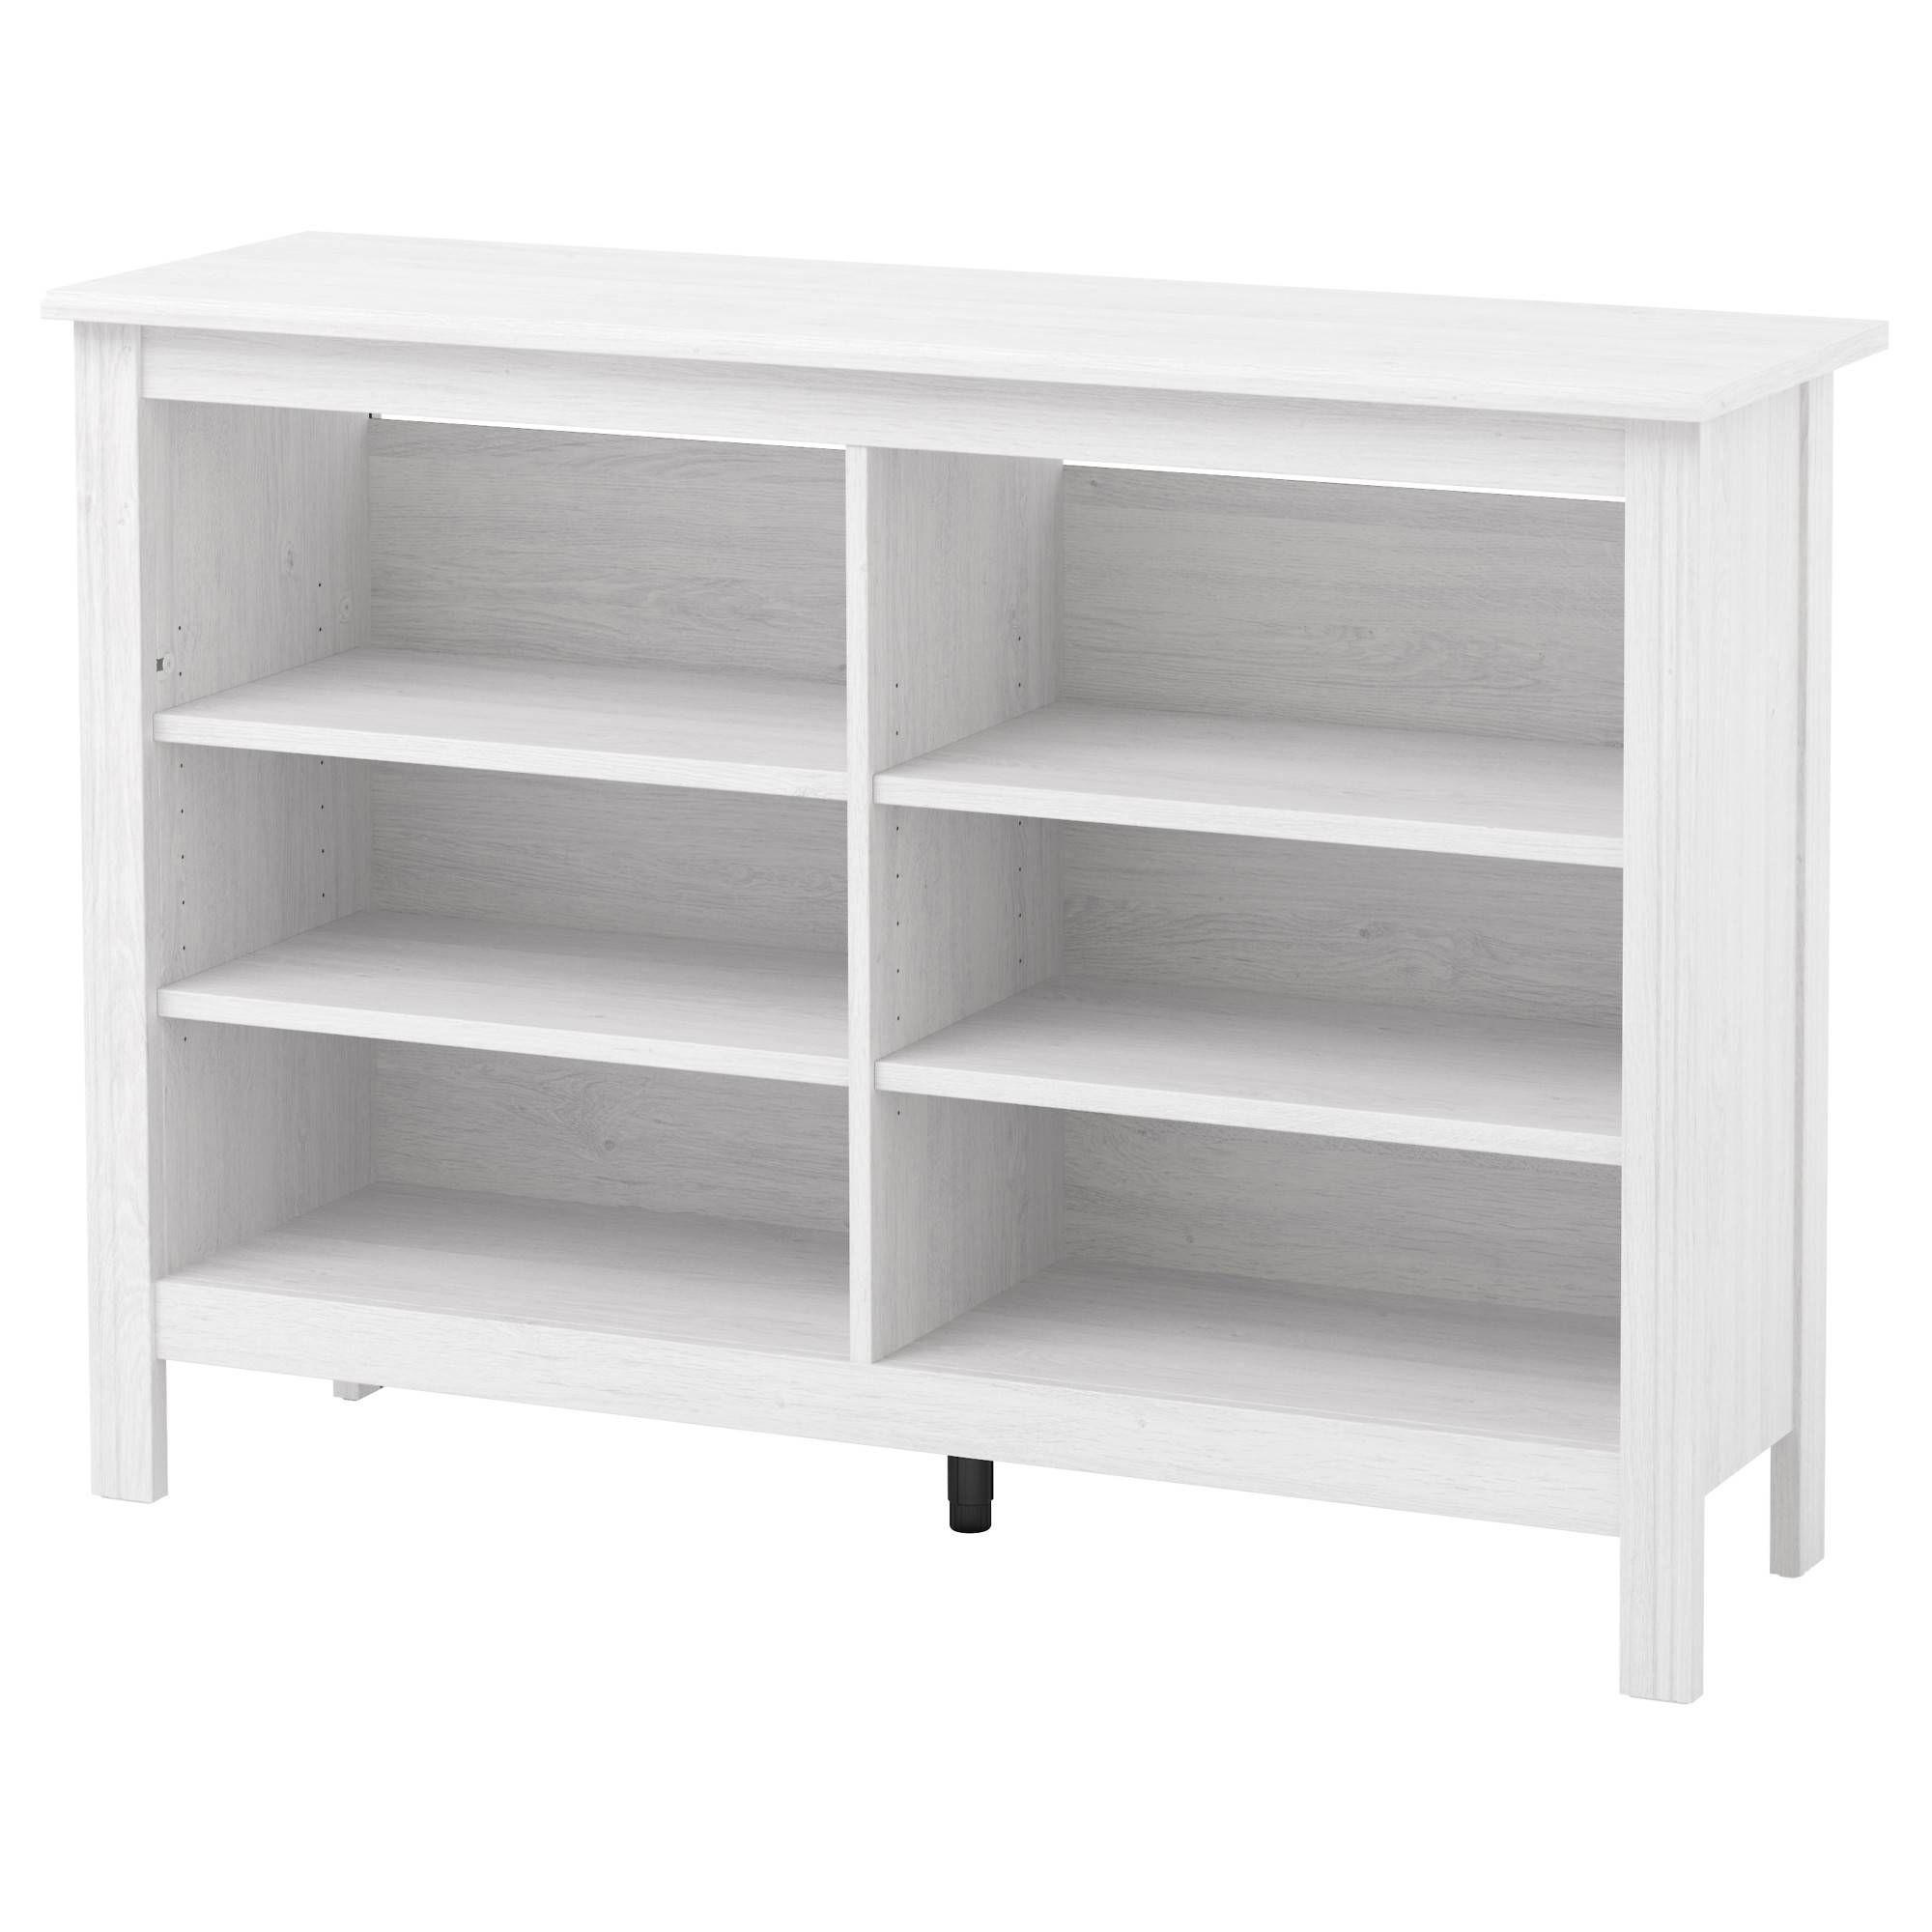 Brusali Tv Unit – White – Ikea With Regard To Small White Tv Cabinets (View 14 of 15)